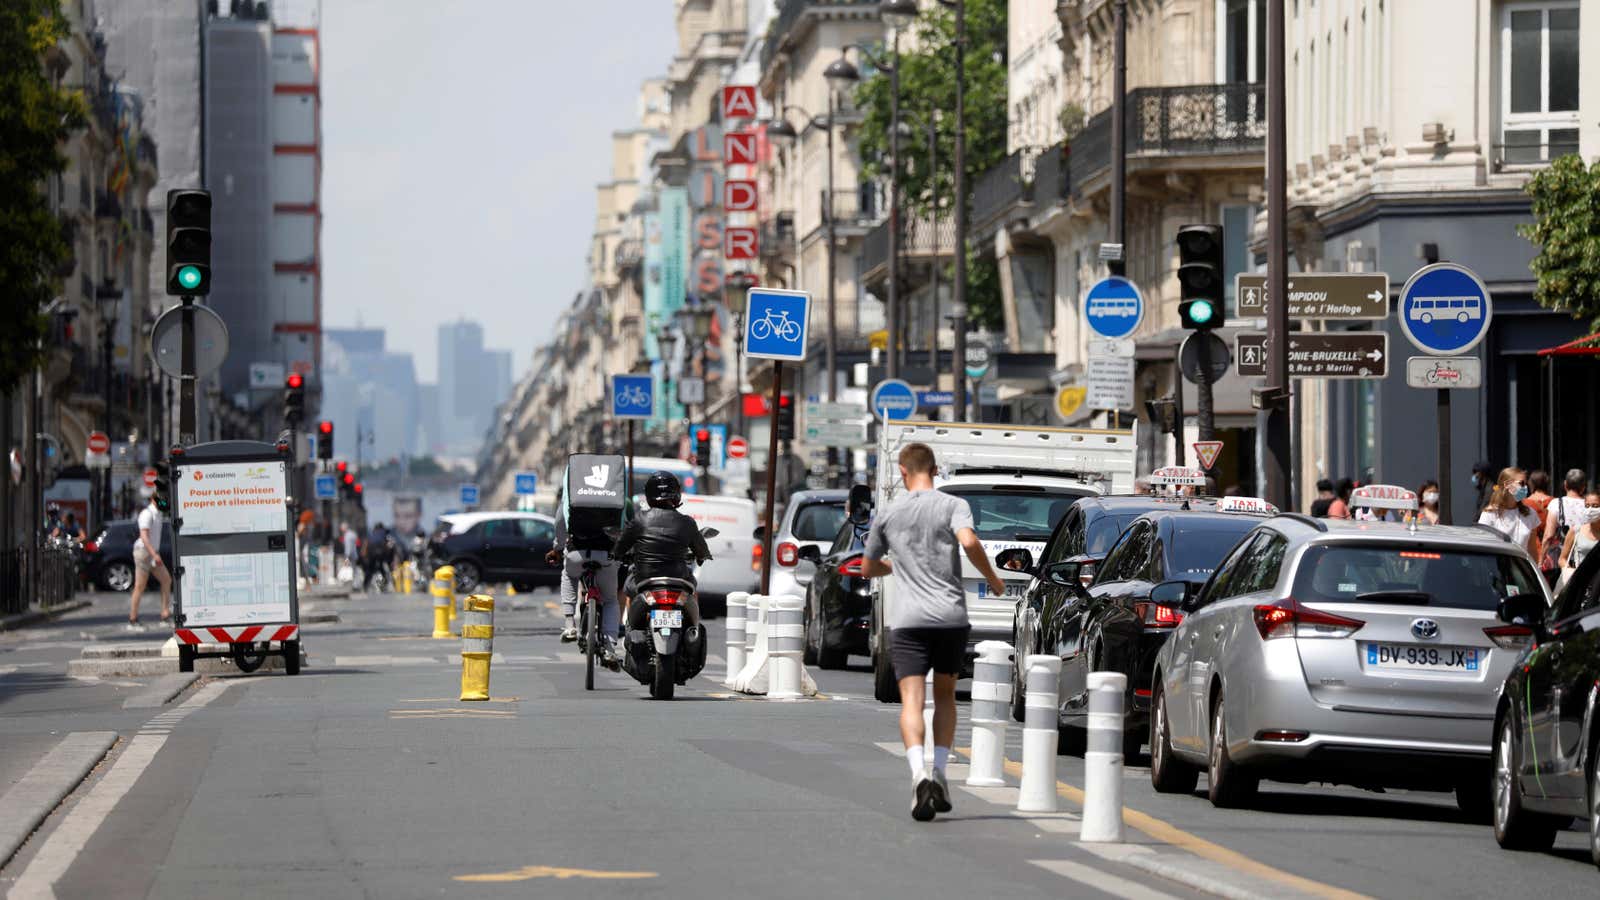 Drivers are sharing the streets in Paris.